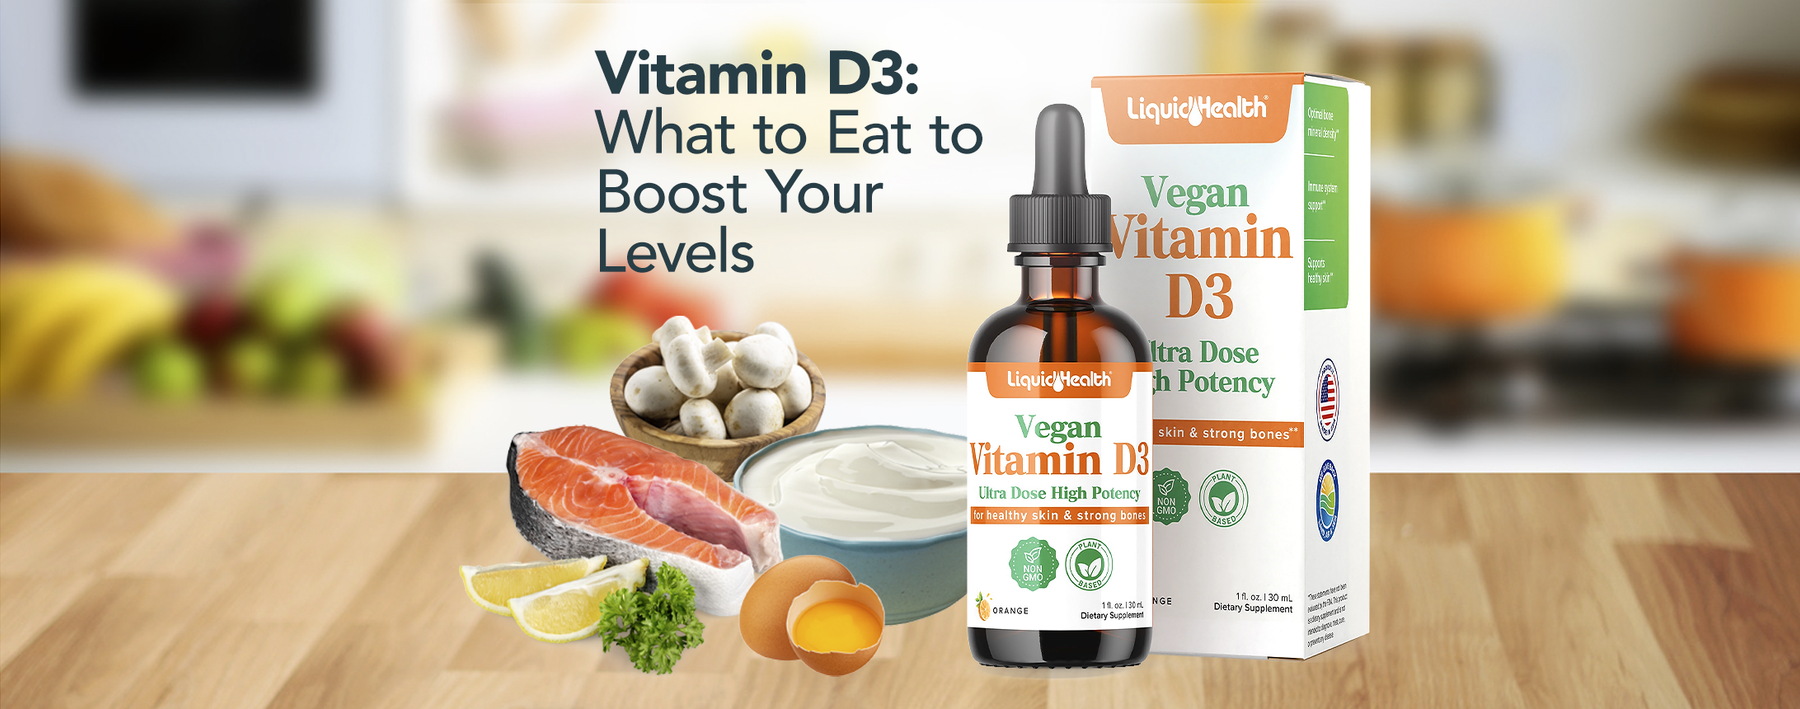 Vitamin D3: What to Eat to Boost Your Levels